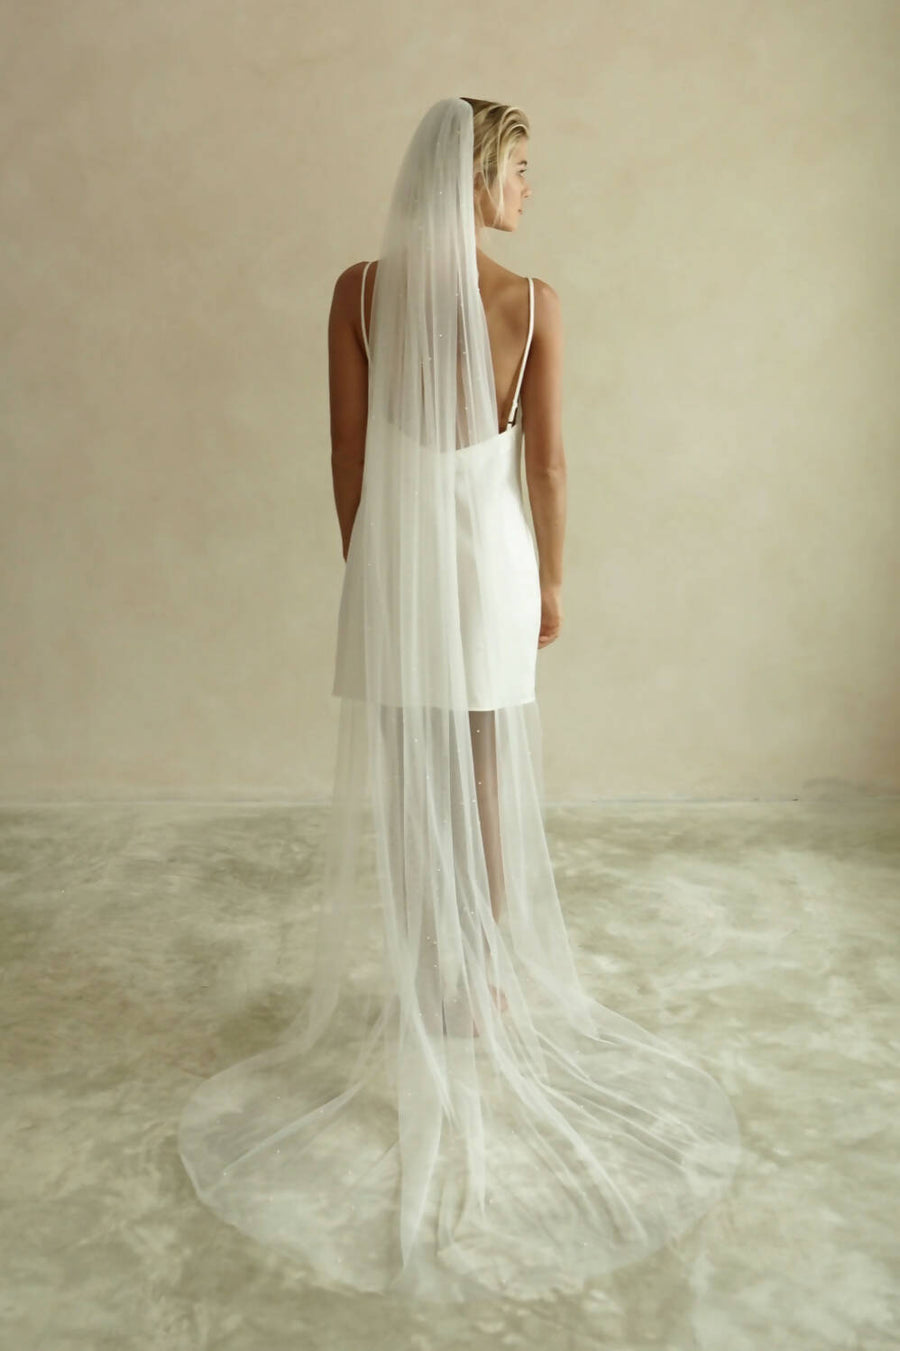 CHLOE I | One Tier Veil with Small Pearls